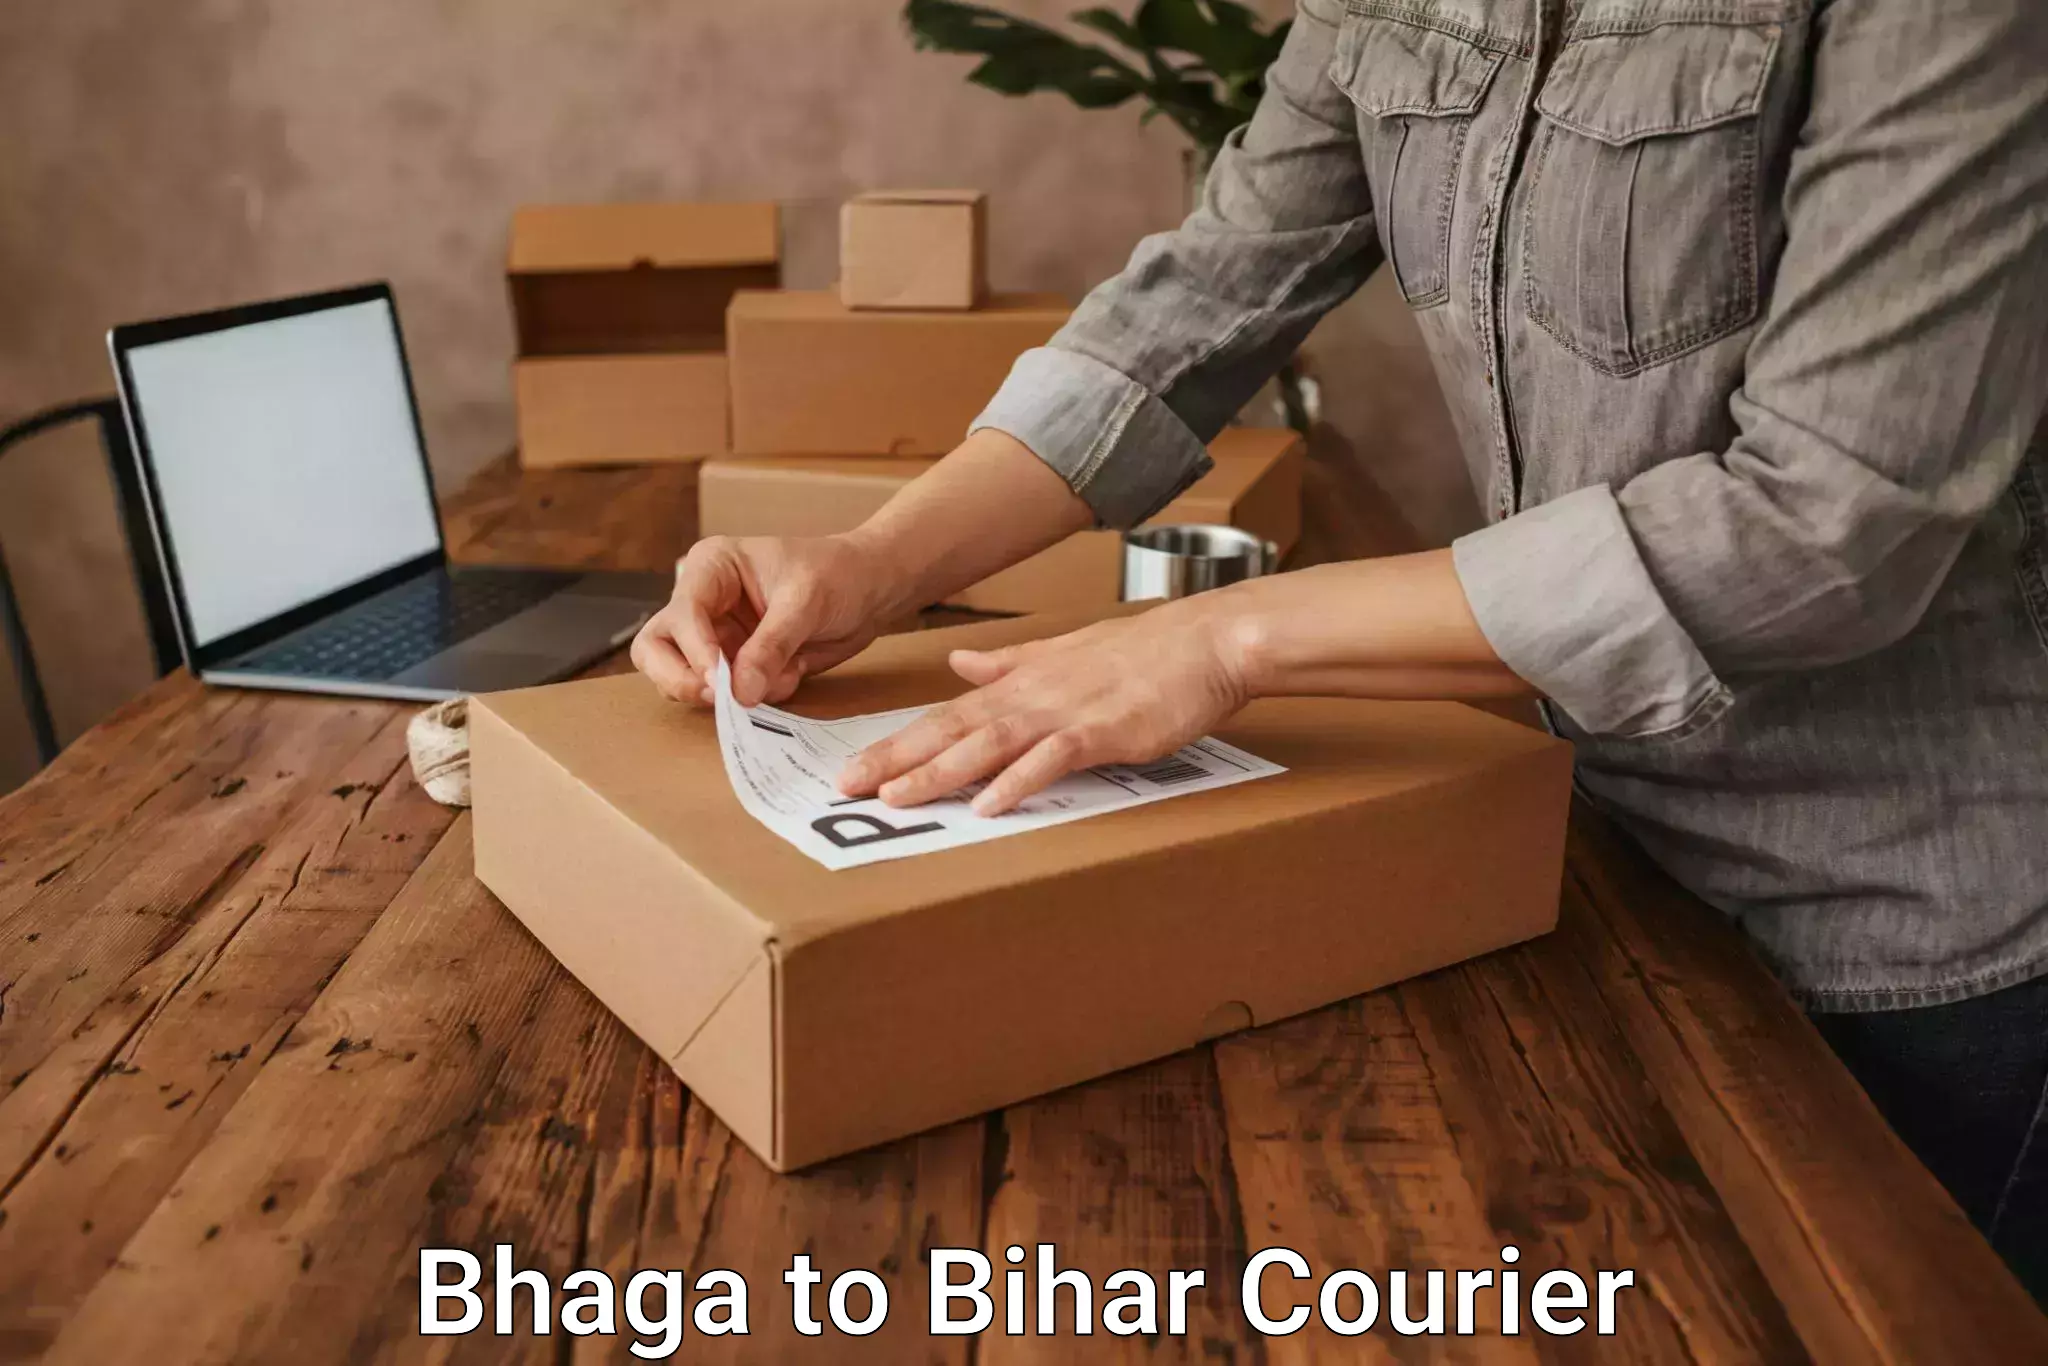 Sustainable courier practices Bhaga to Bihar